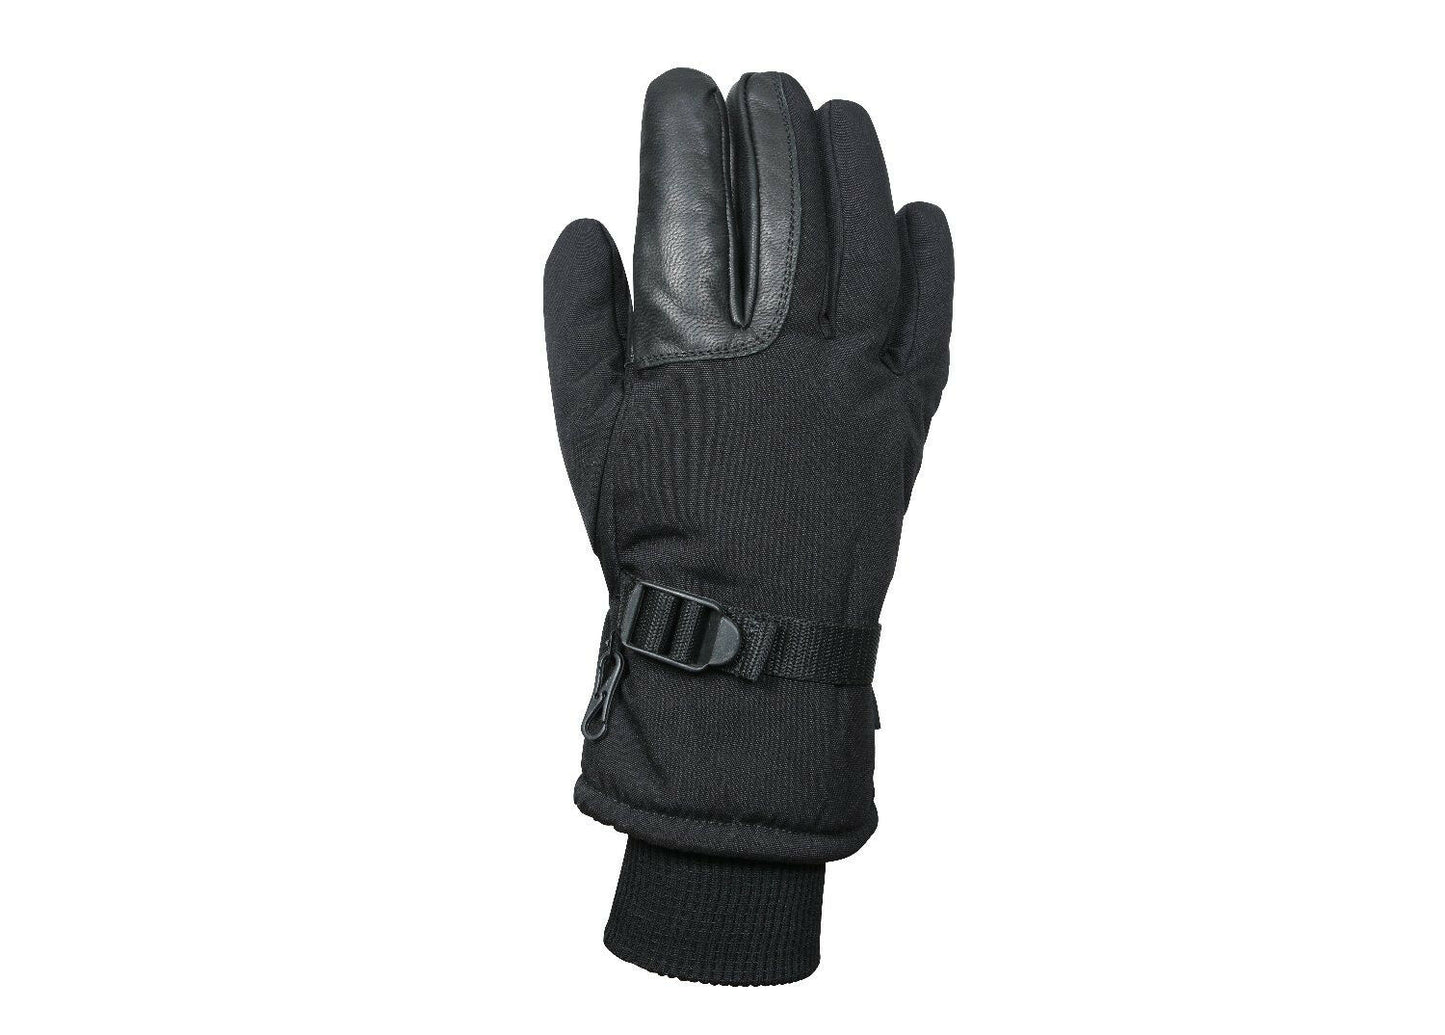 Rothco Cold Weather Military Gloves - Black